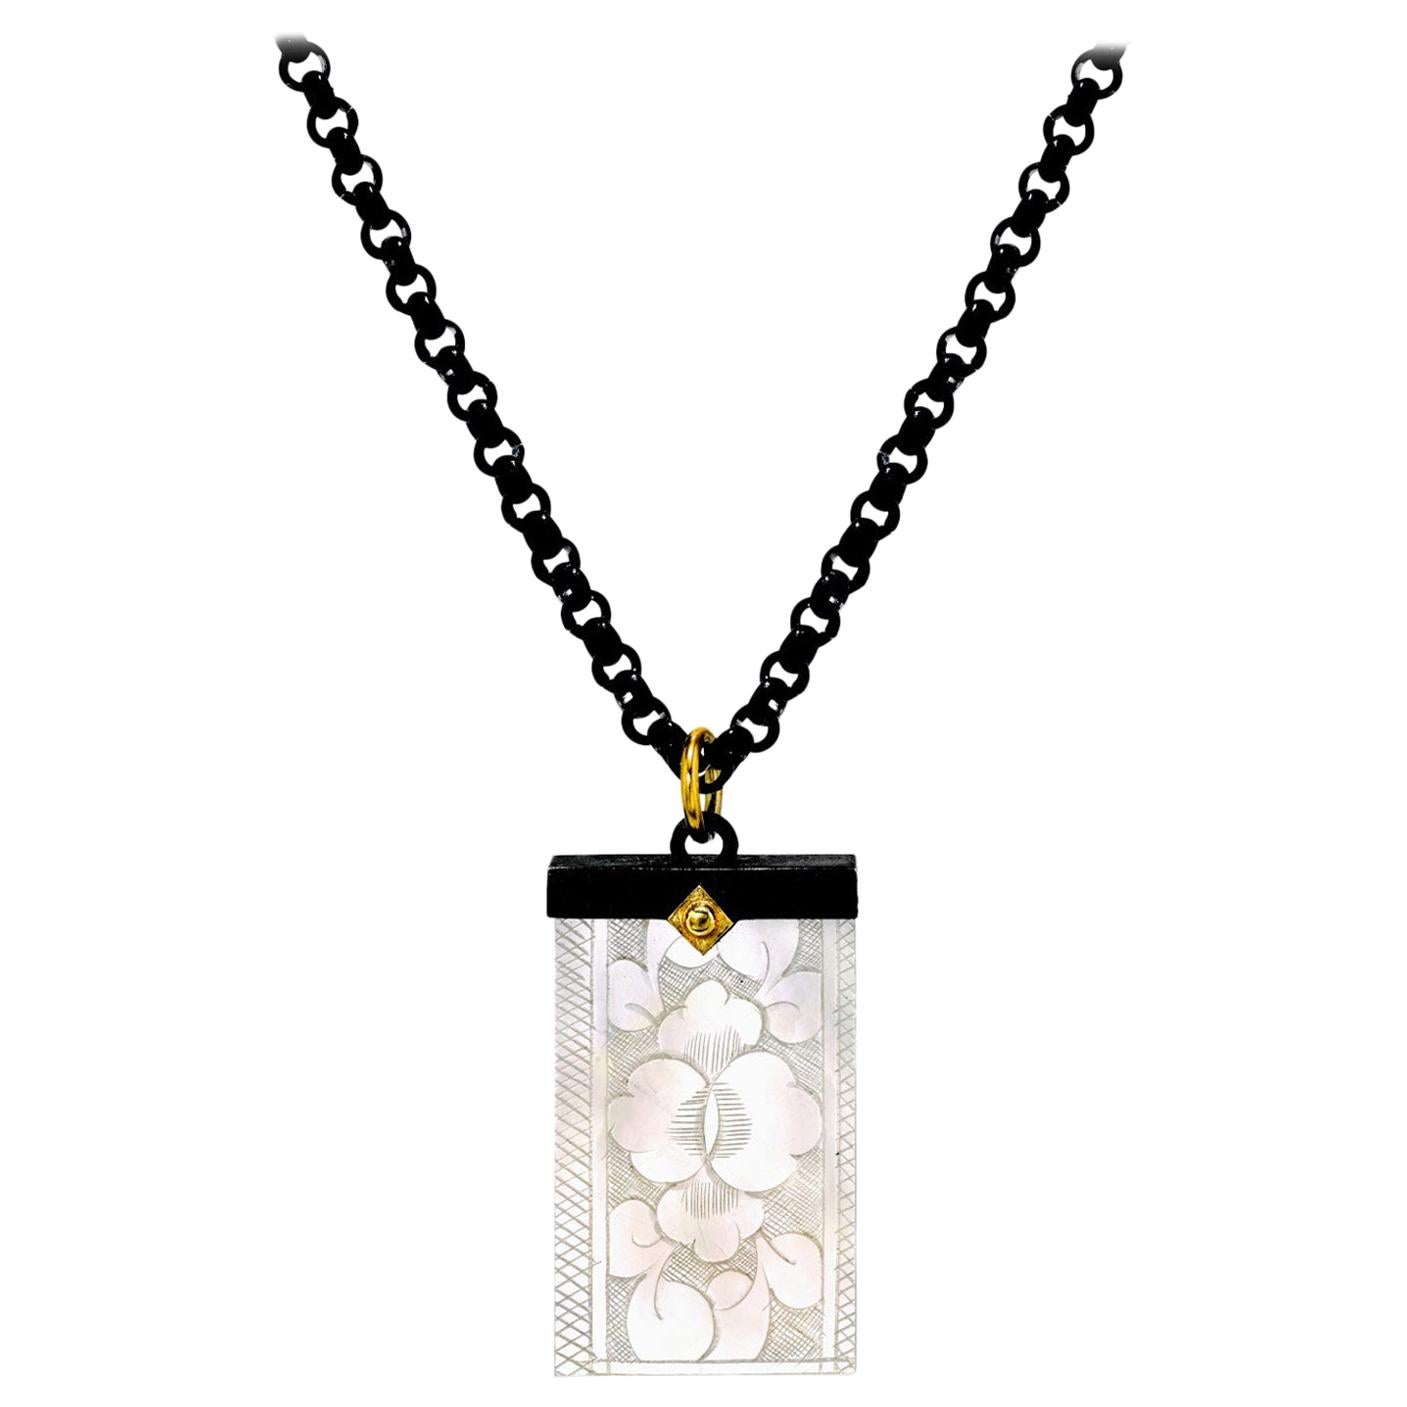 Antique Mother of Pearl Gambling Chip, Gold/Blackened Silver Pendant Necklace